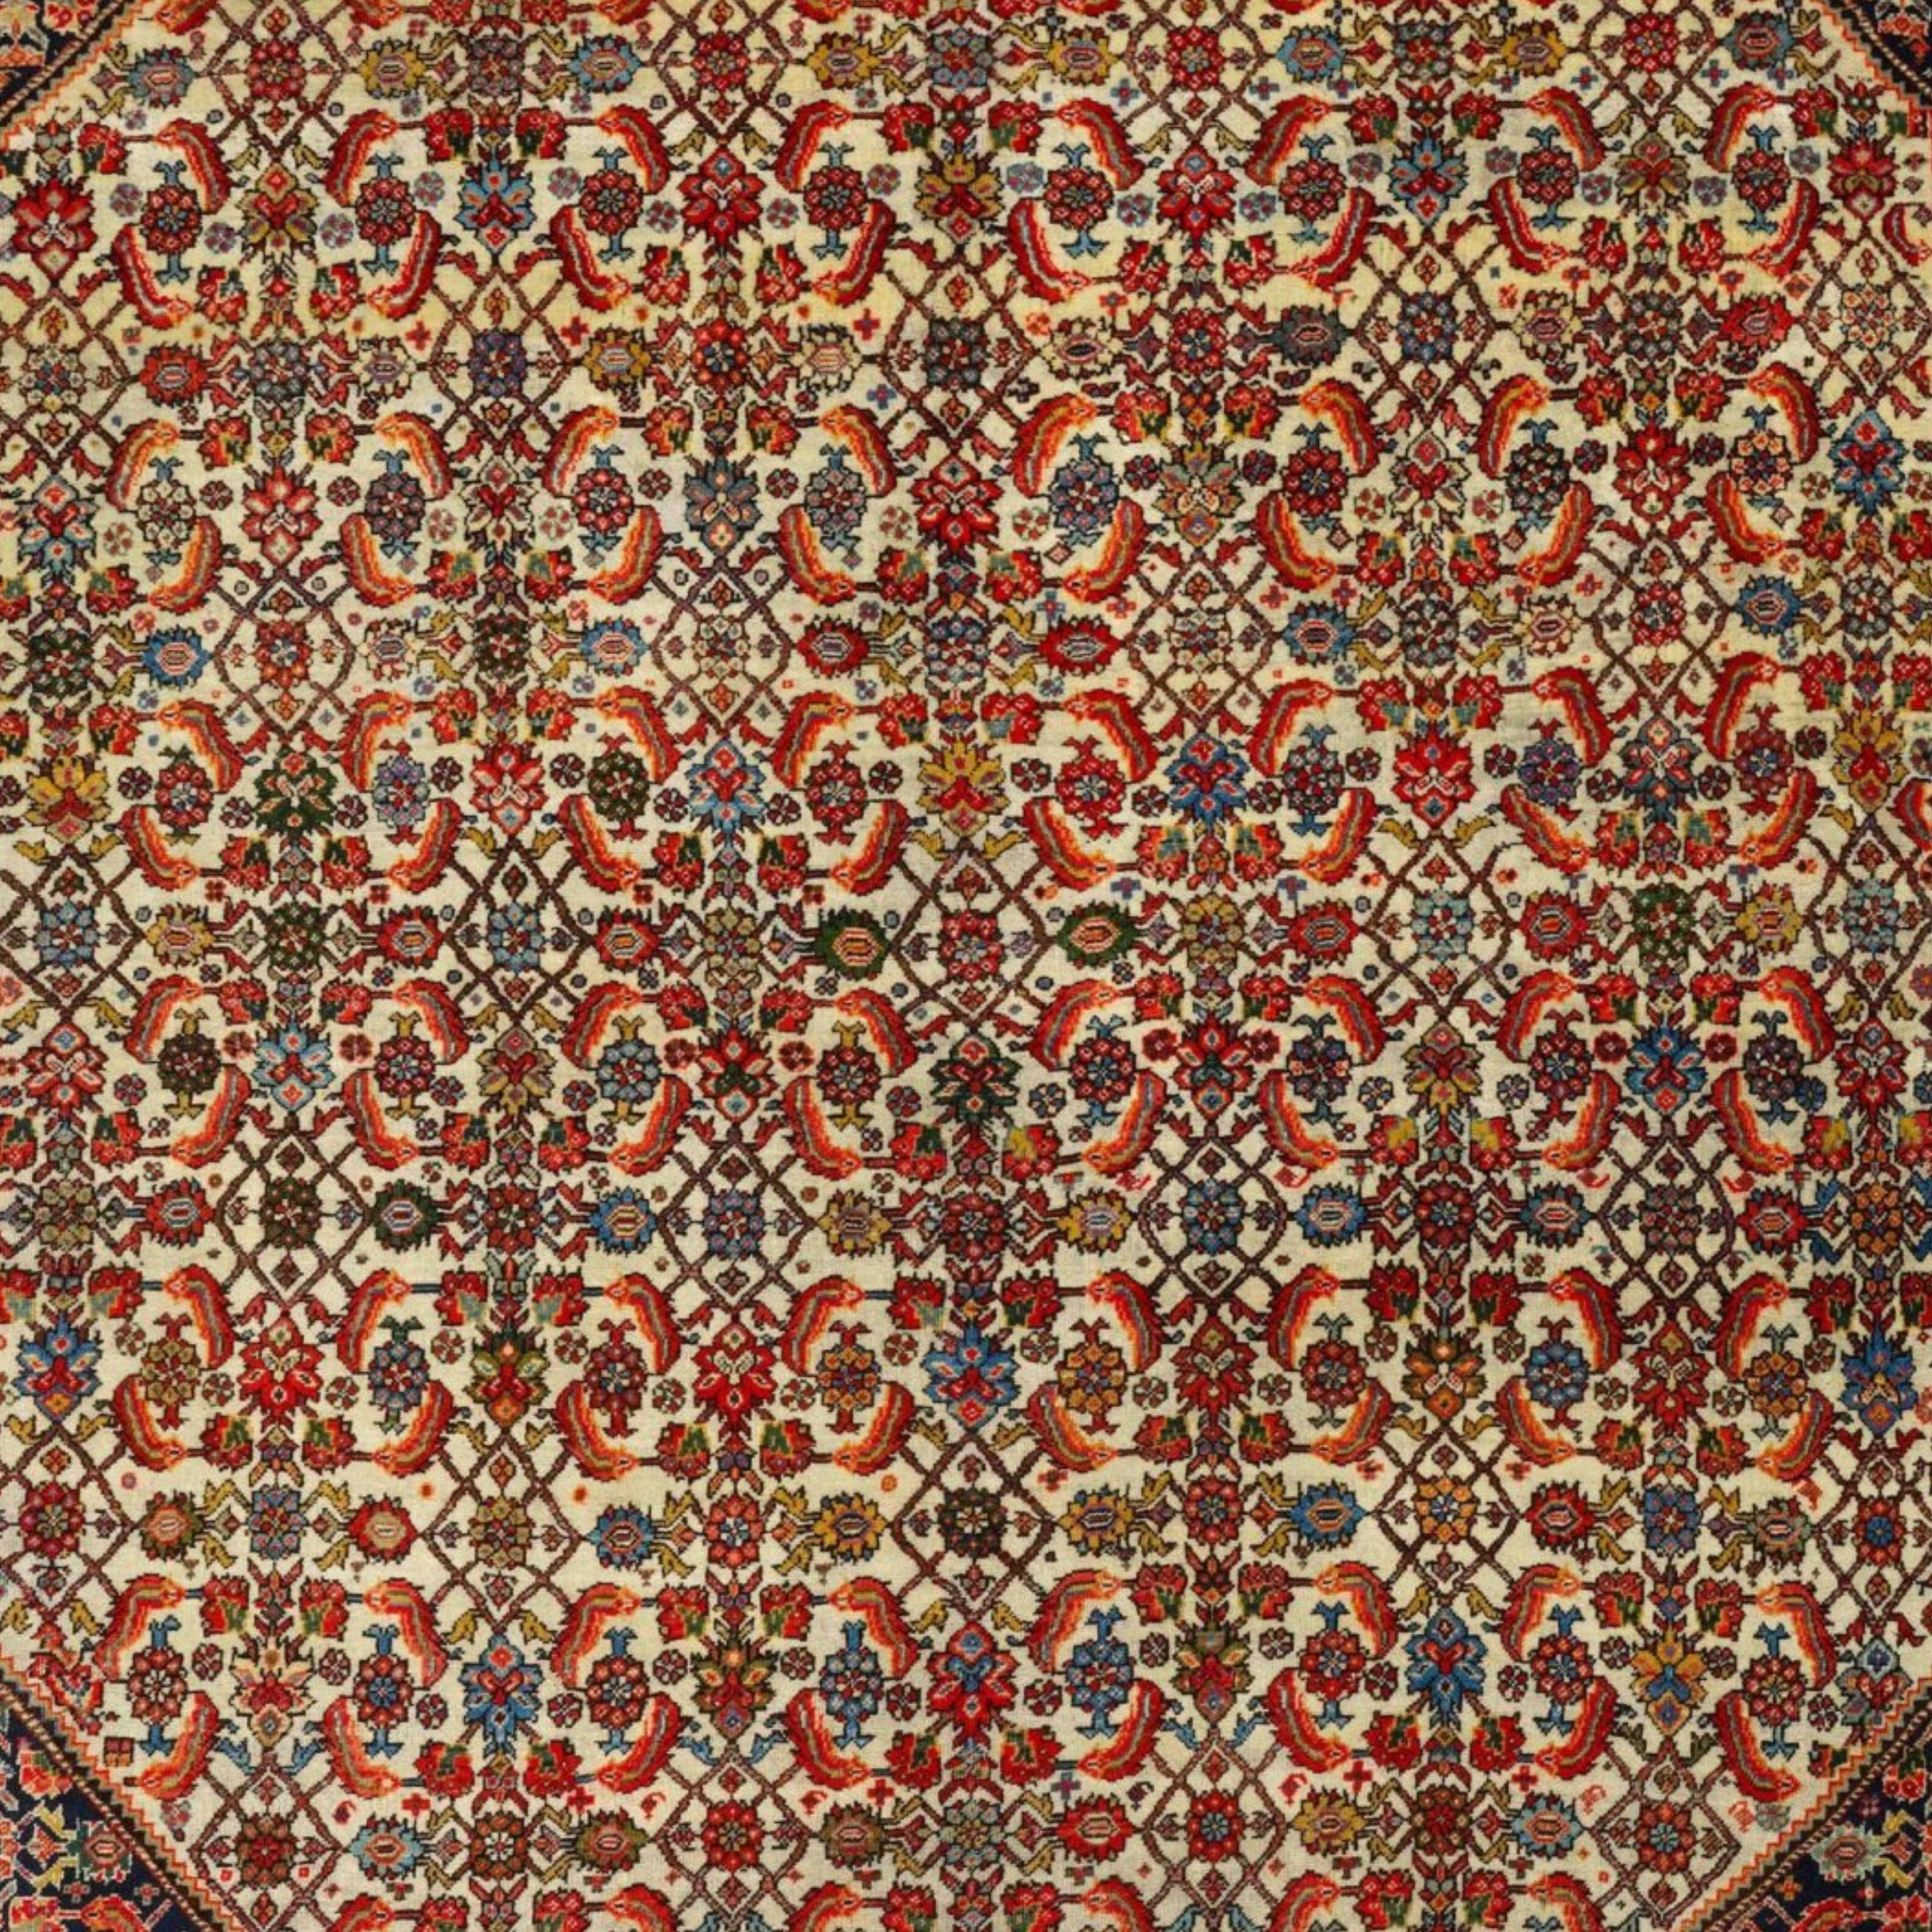 Antique Kaskhai Rug - Late 19th Century Silk Weft Kaskhai Rug, Persian Rug In Good Condition For Sale In Sultanahmet, 34